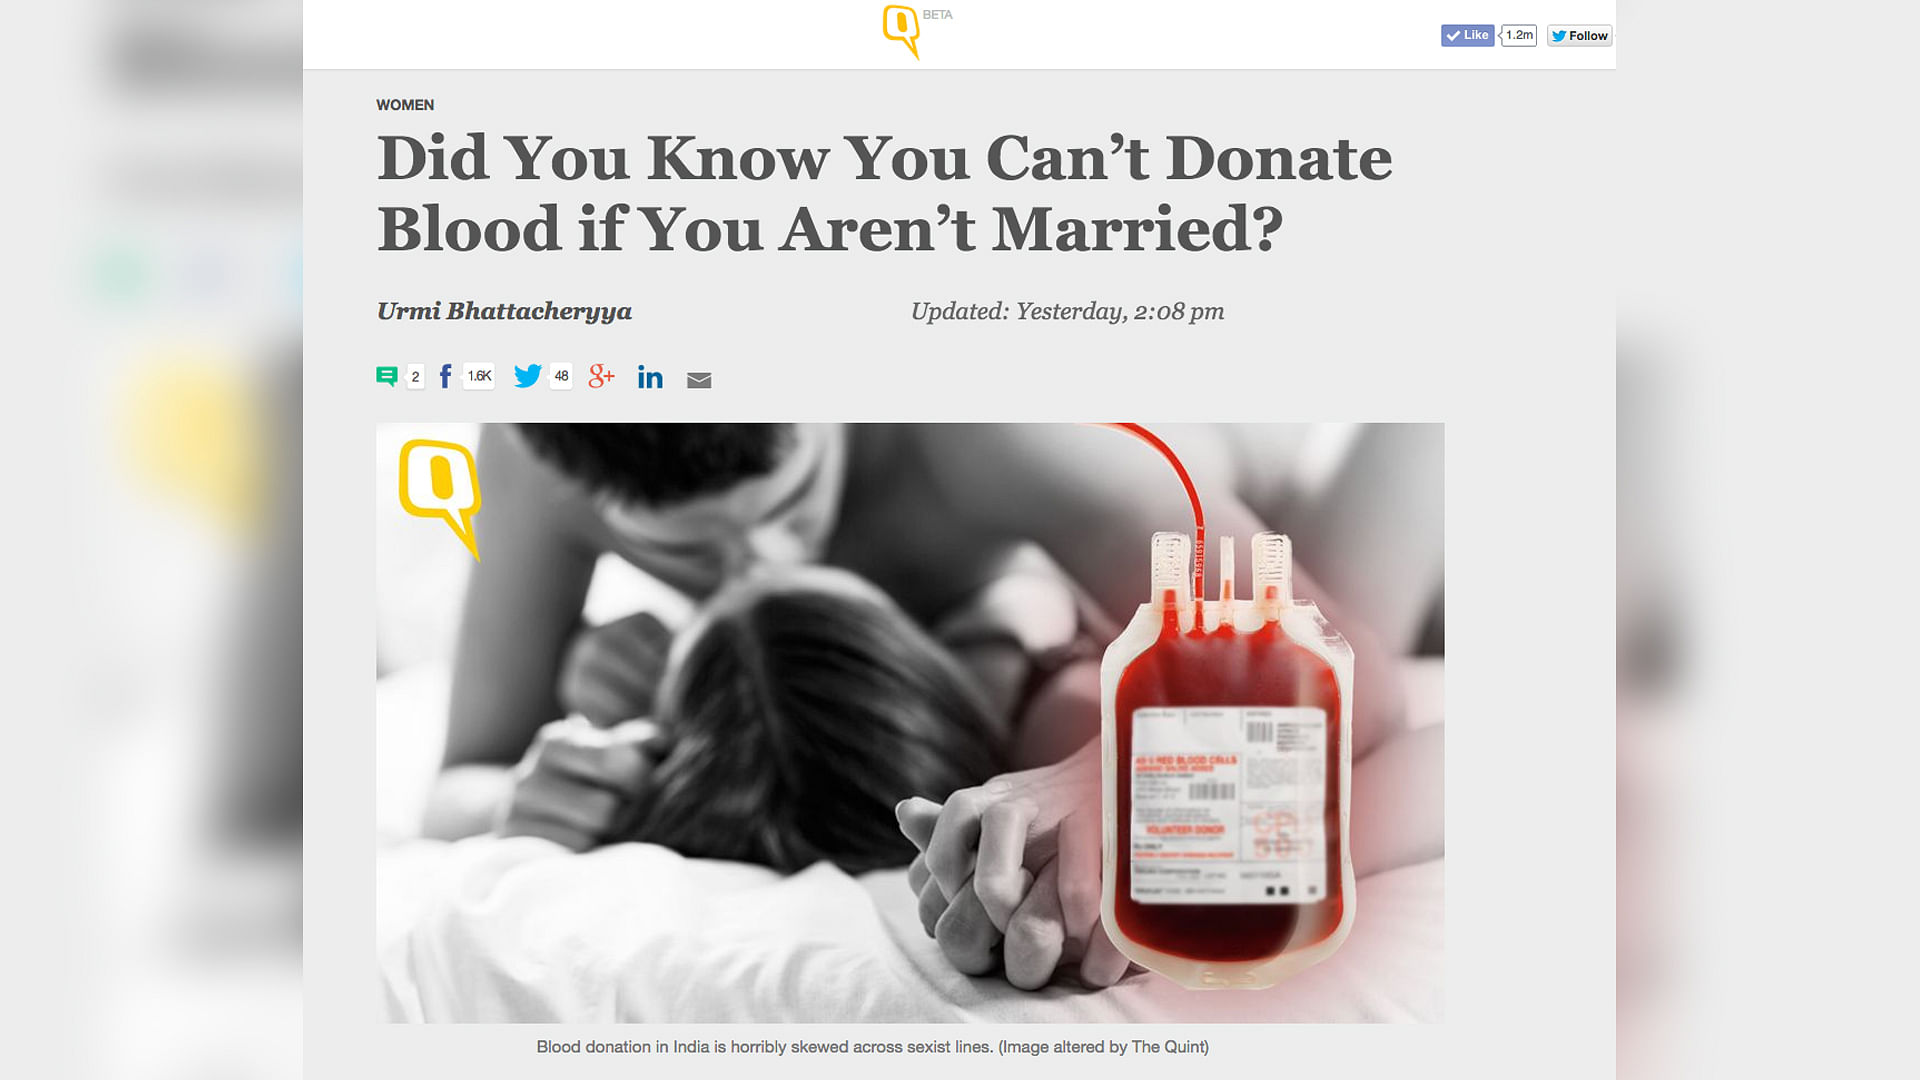 Blood donation in India is horribly skewed across sexist lines. (Image altered by The Quint)